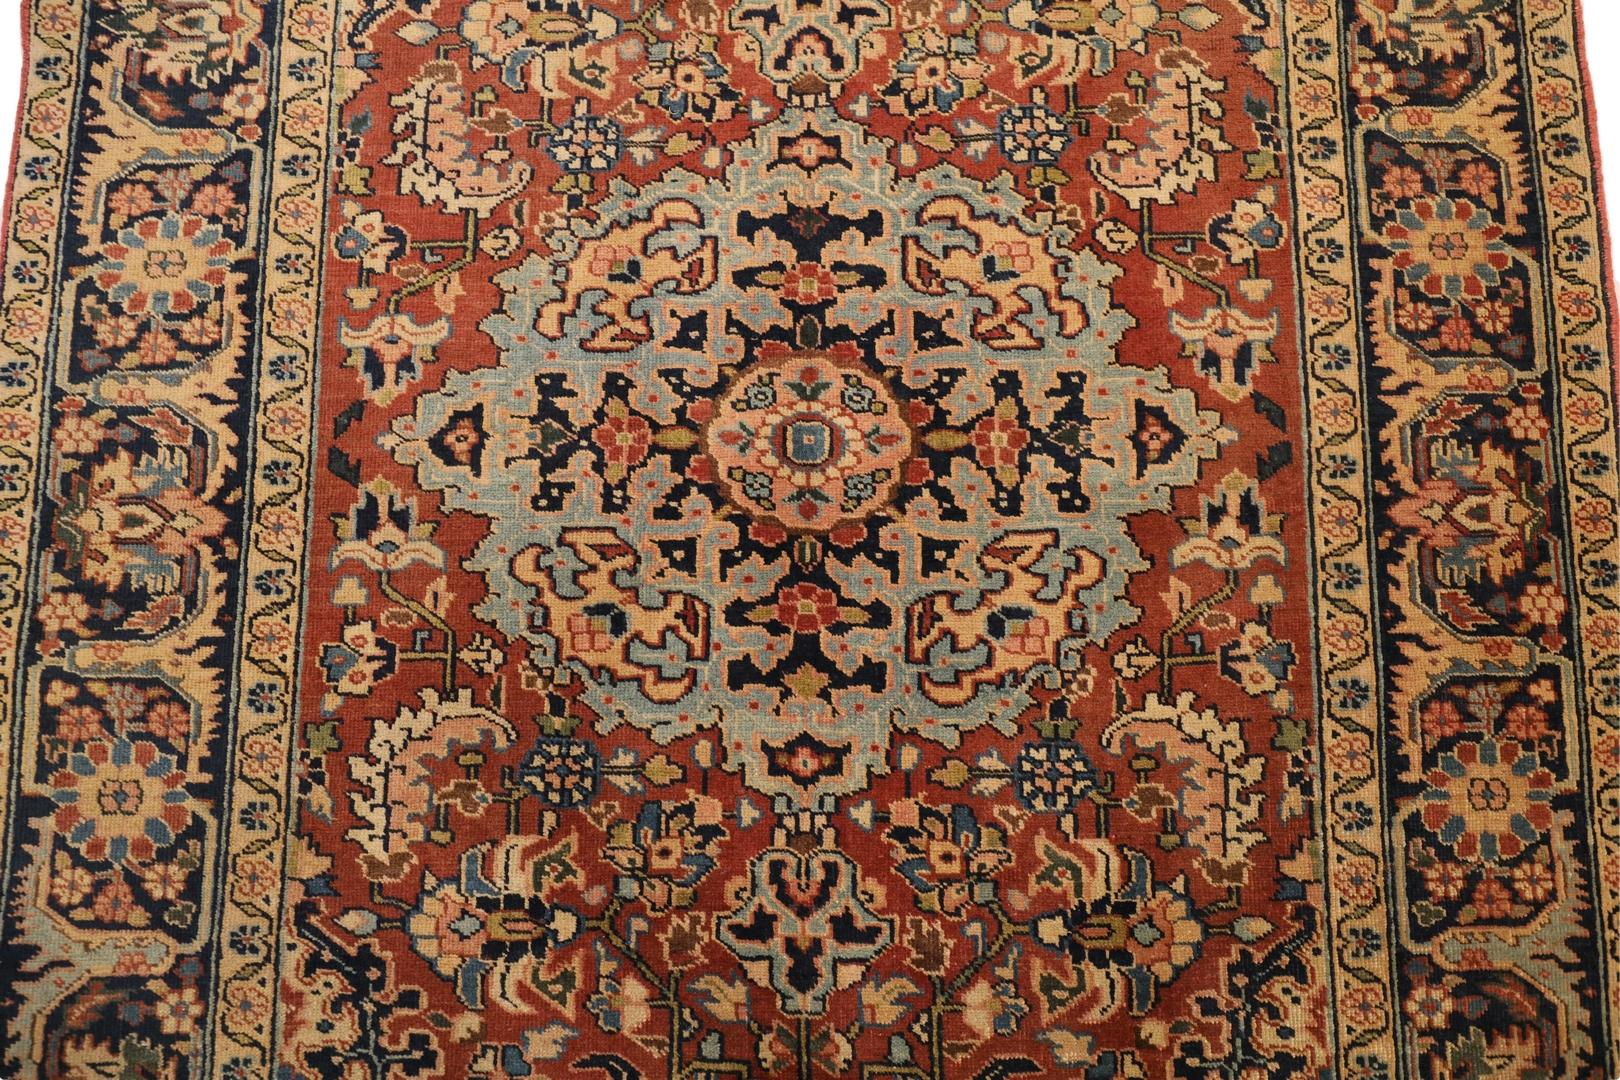 Hand-Knotted Heriz Antique Rug, Red Light-Blue Navy - 6 x 9 For Sale